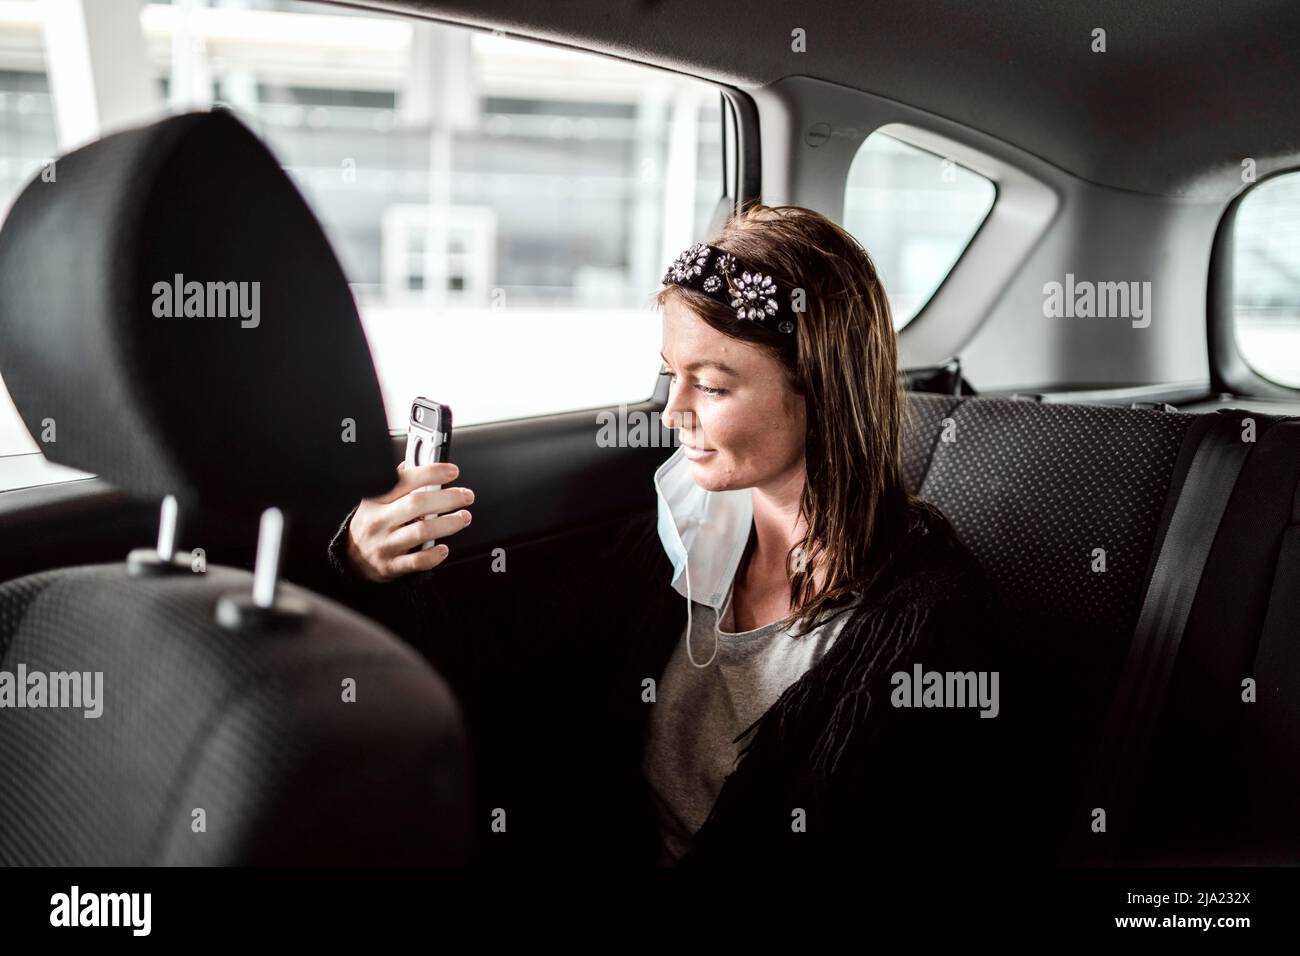 A taxi or Uber passenger talking through the phone on the car back seat Stock Photo